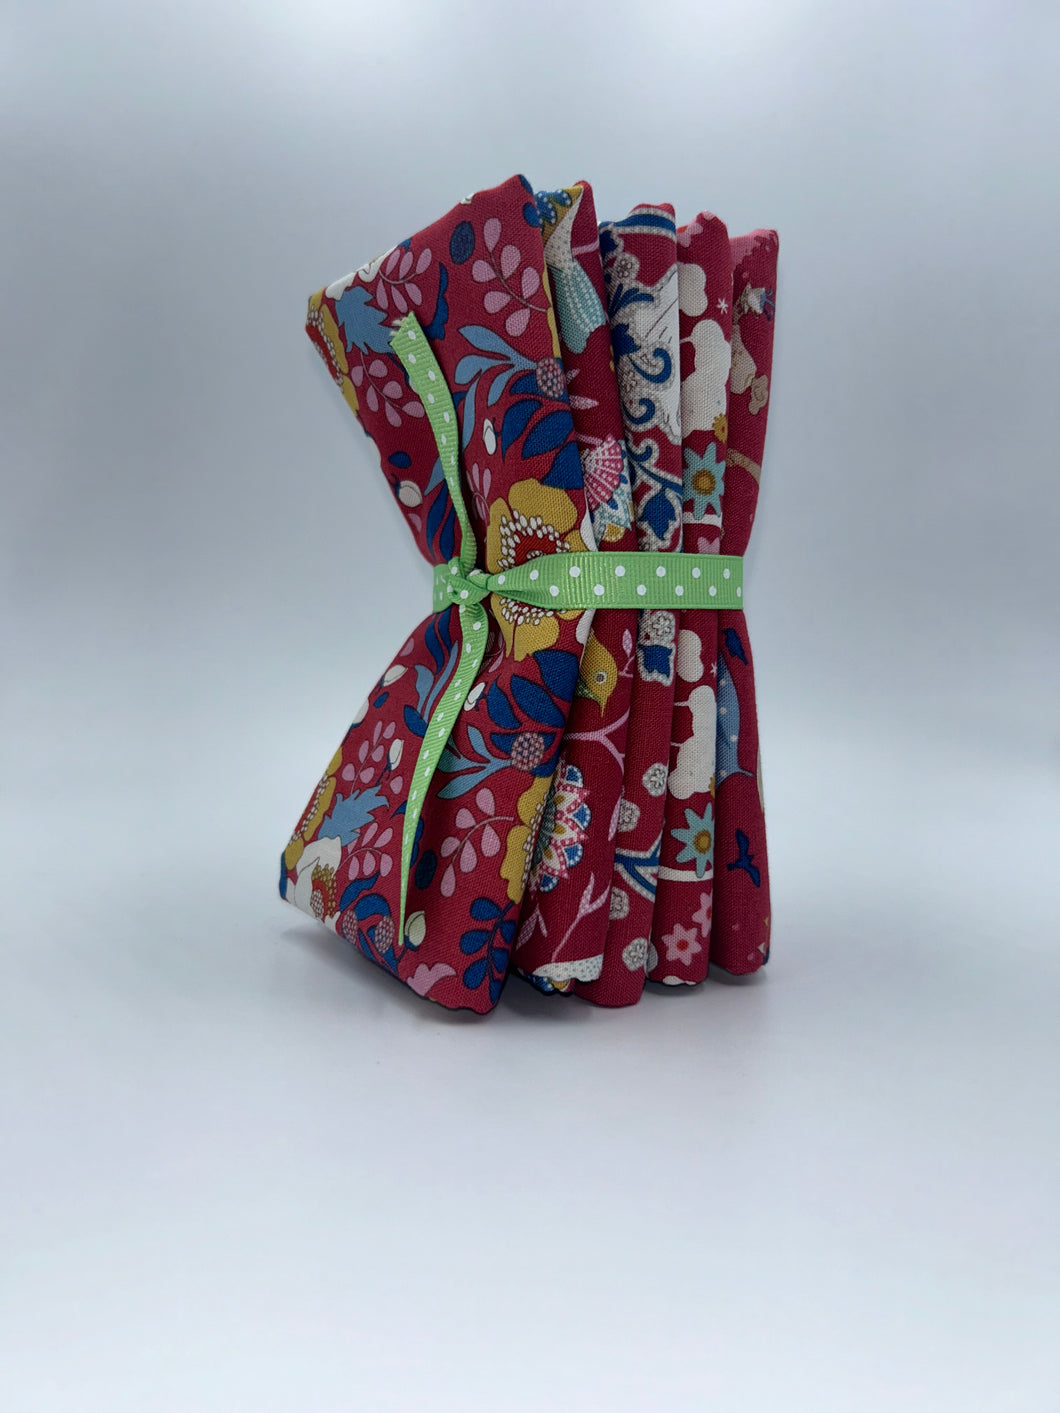 Bundle of 5 Fat Quarters of Jubilee by Tilda Fabrics - In Red